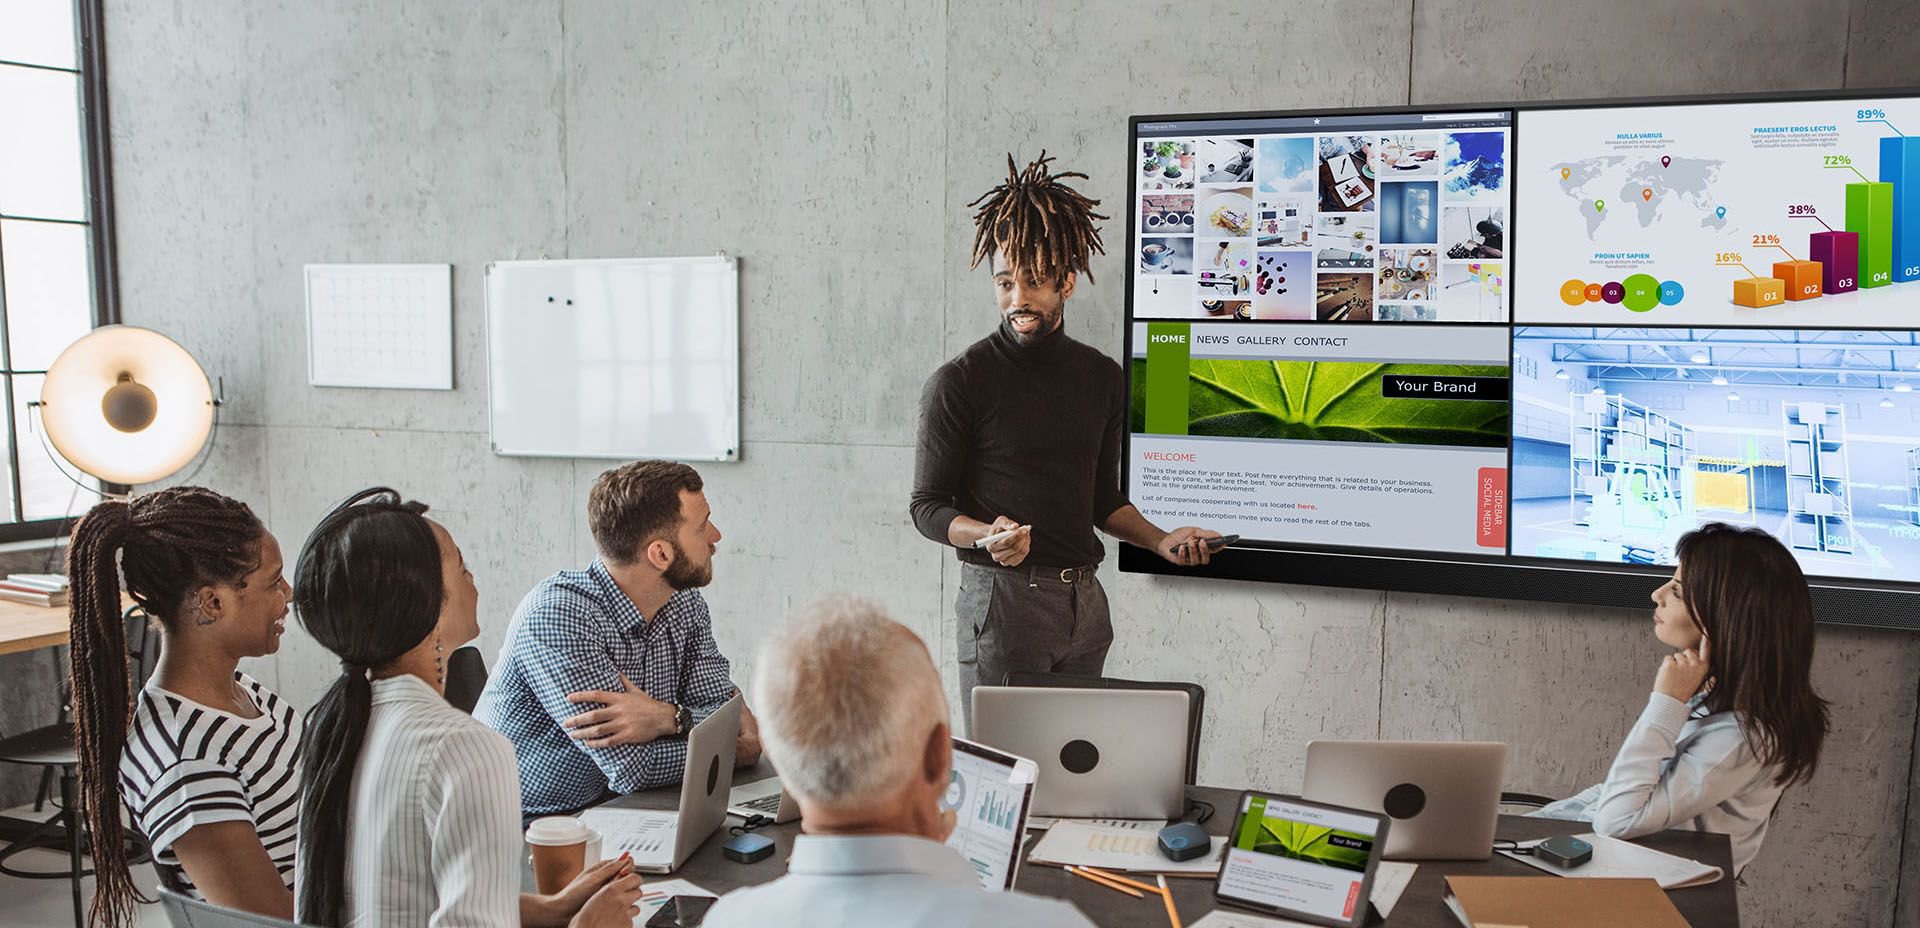 InstaShow makes it possible to use one monitor to share / present multiple ideas at the same time. It’s especially suitable for brainstorming and group discussions.